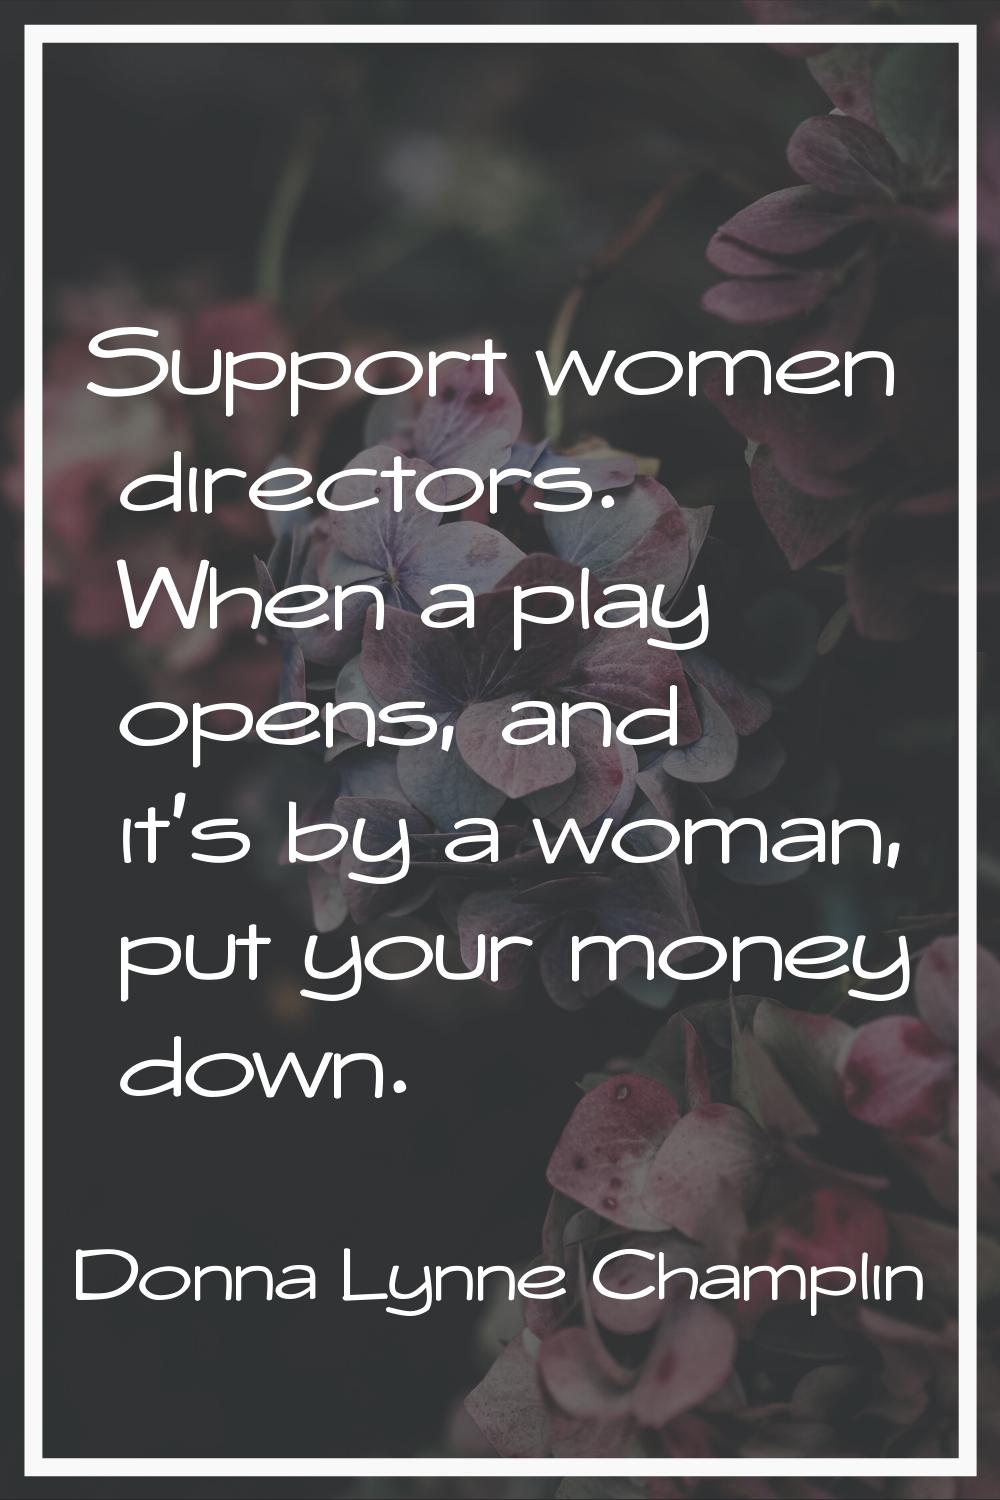 Support women directors. When a play opens, and it's by a woman, put your money down.